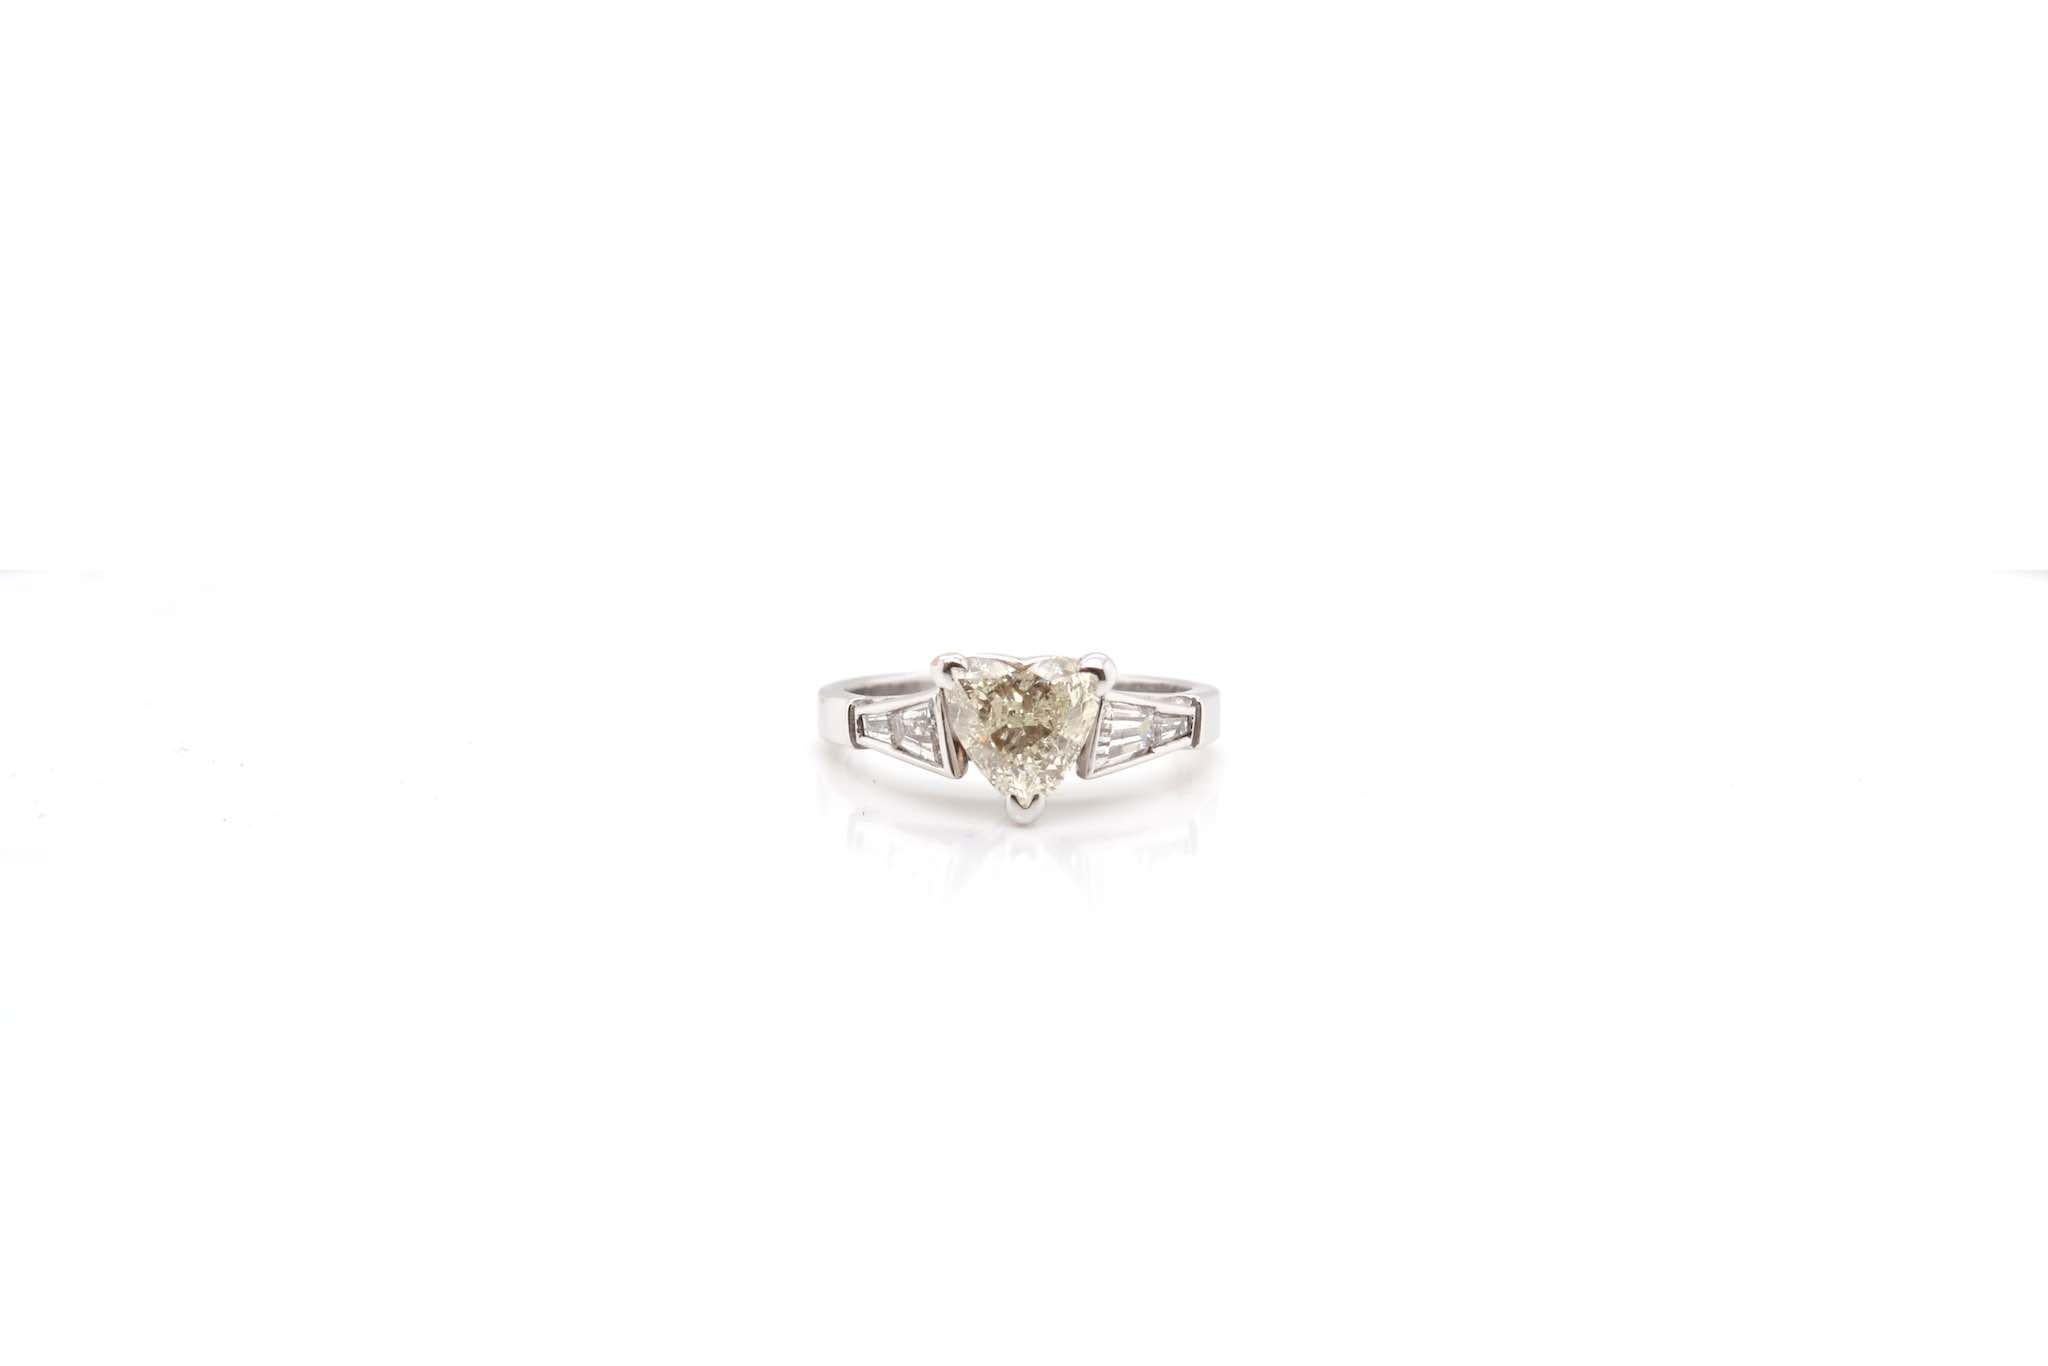 Stones: Heart-cut diamond of approximately 1.30 carats
and trapezoid diamonds for a total weight of 0.55 carats.
Material: 18k white gold
Dimensions: 8 mm length on finger, 7 mm height
Weight: 4.3g
Size: 53 (free sizing)
Certificate
Ref. : 24750